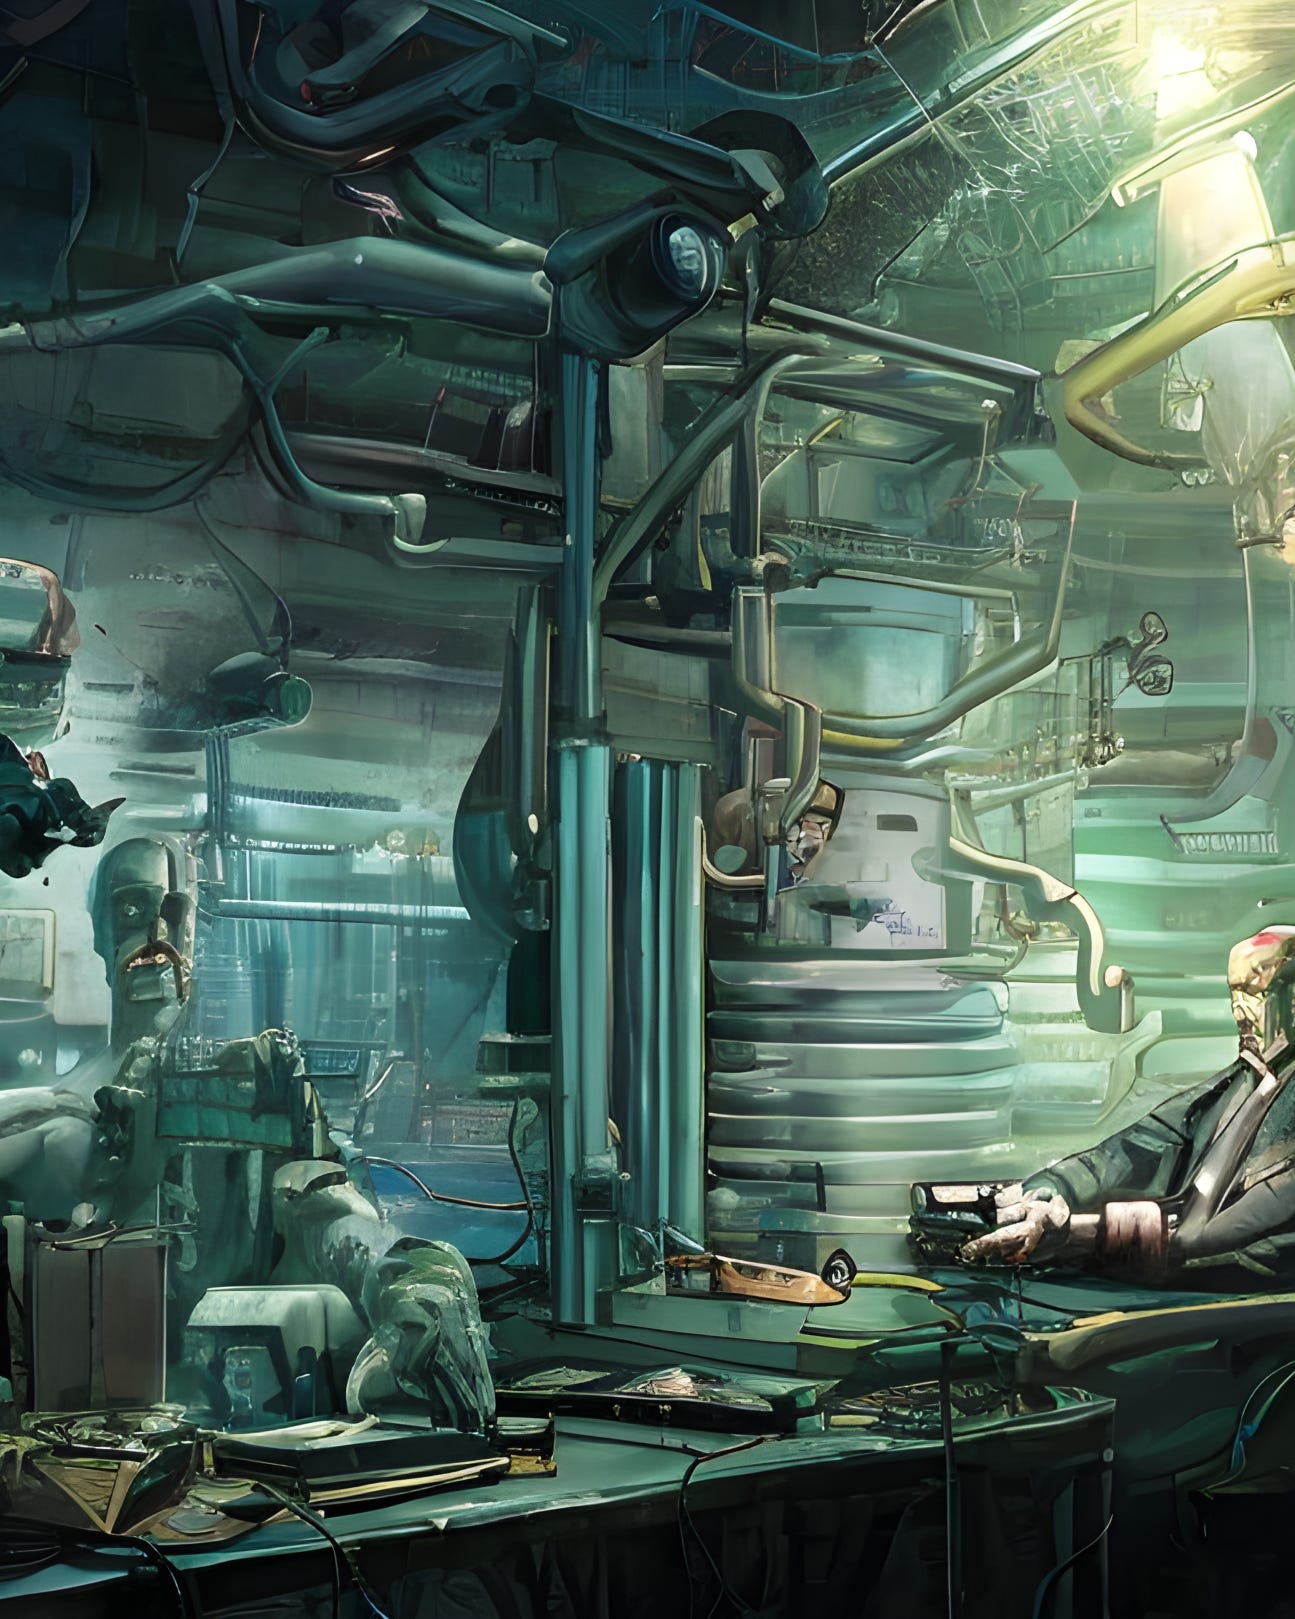 A cyberpunk image of Dr. Frankenstein and his Machine, drawn by StarryAI